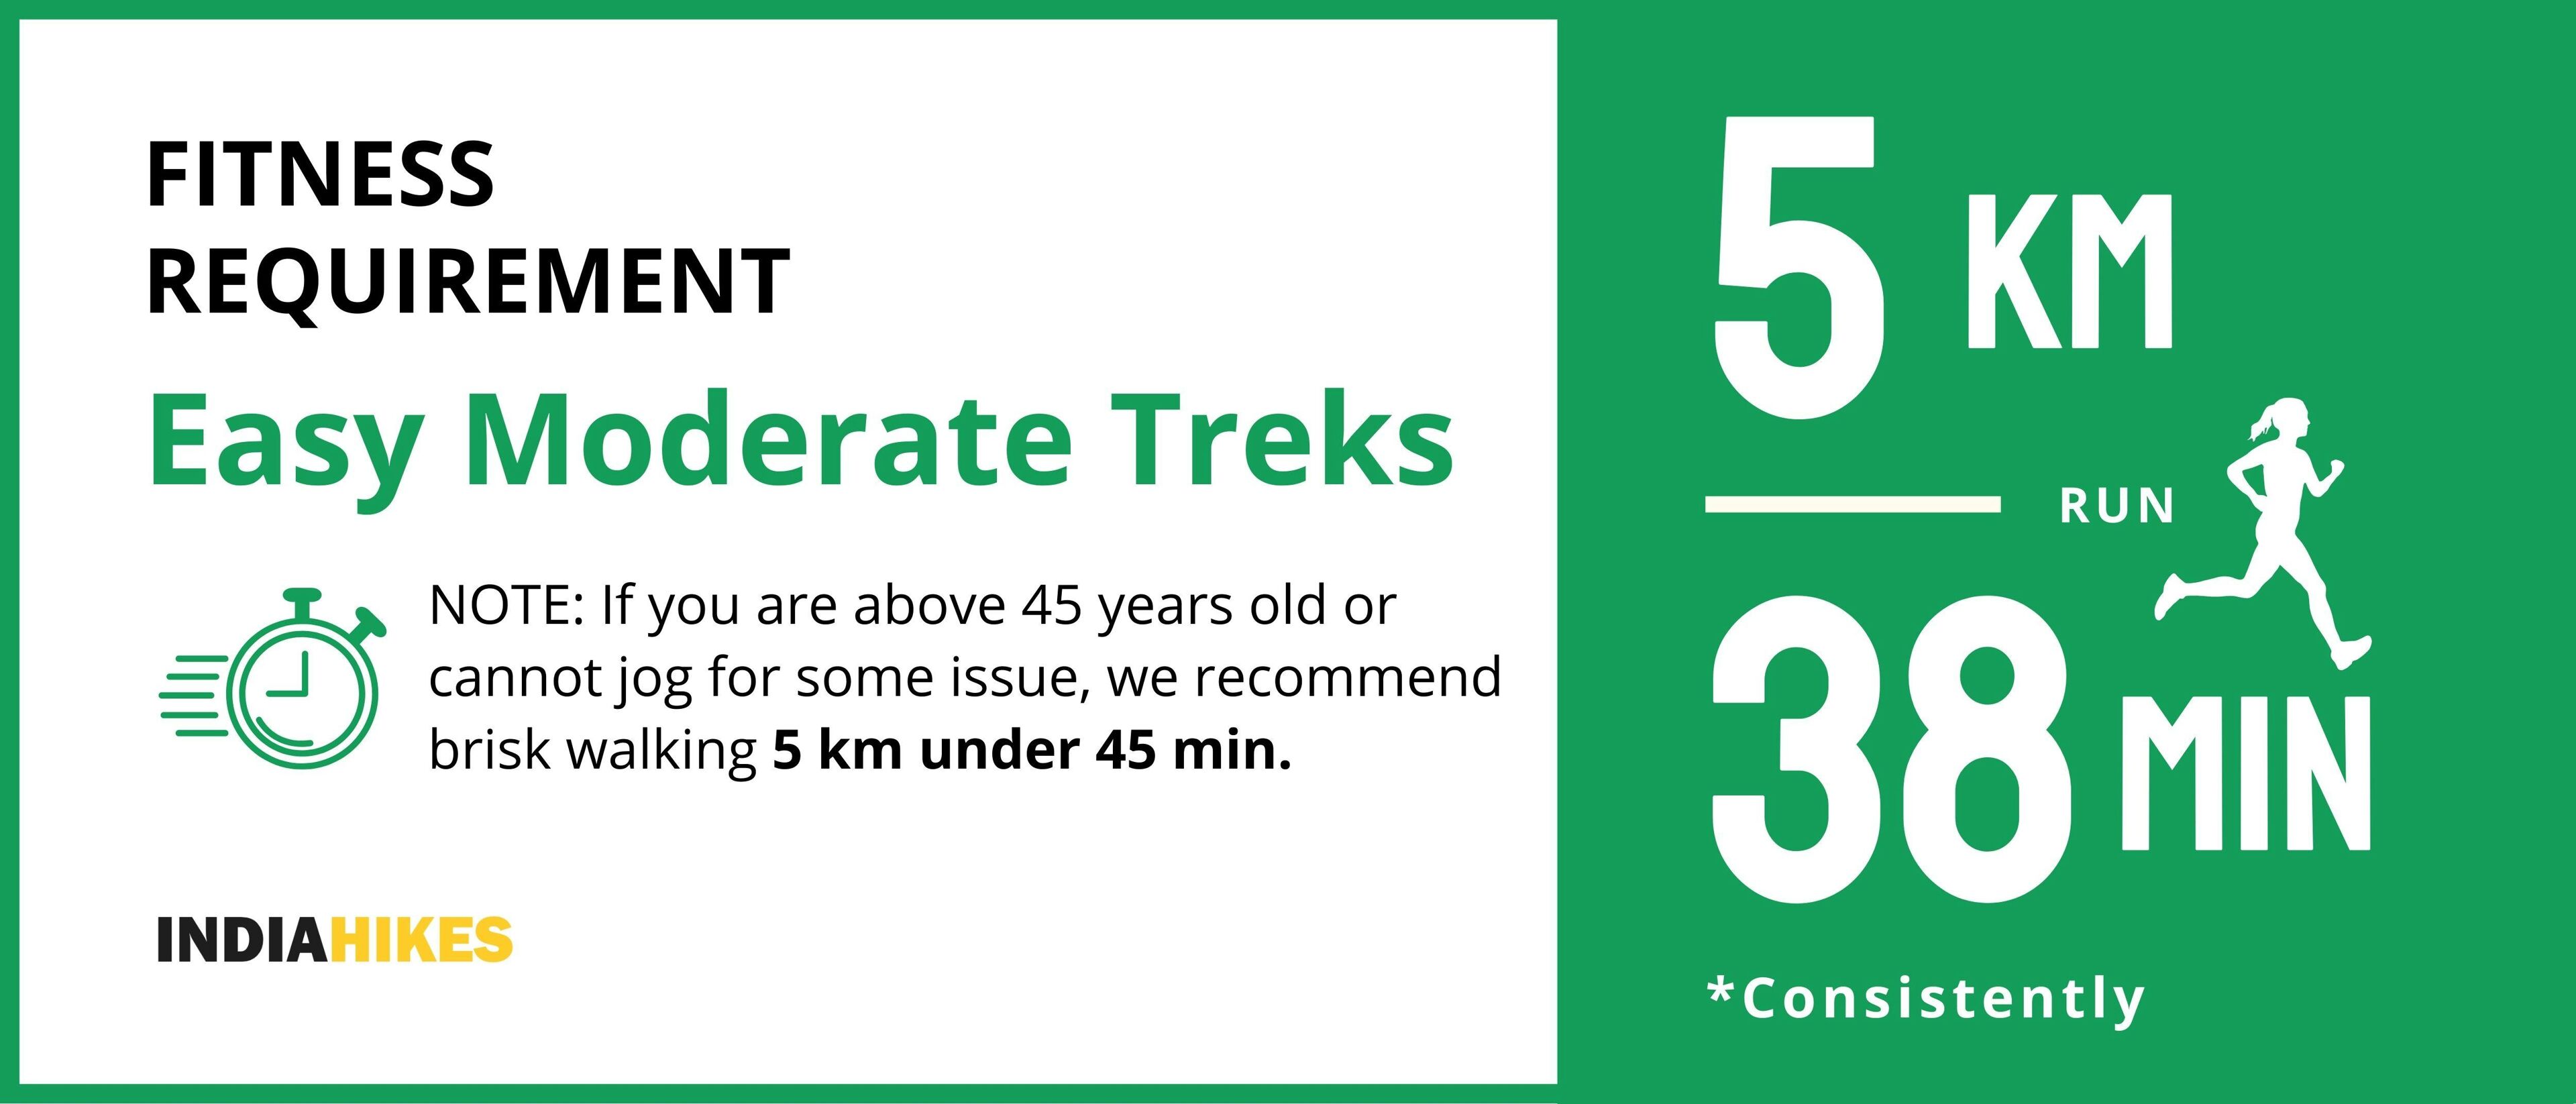 fitness requirements, fitness requirement, easy moderate treks, Indiahikes